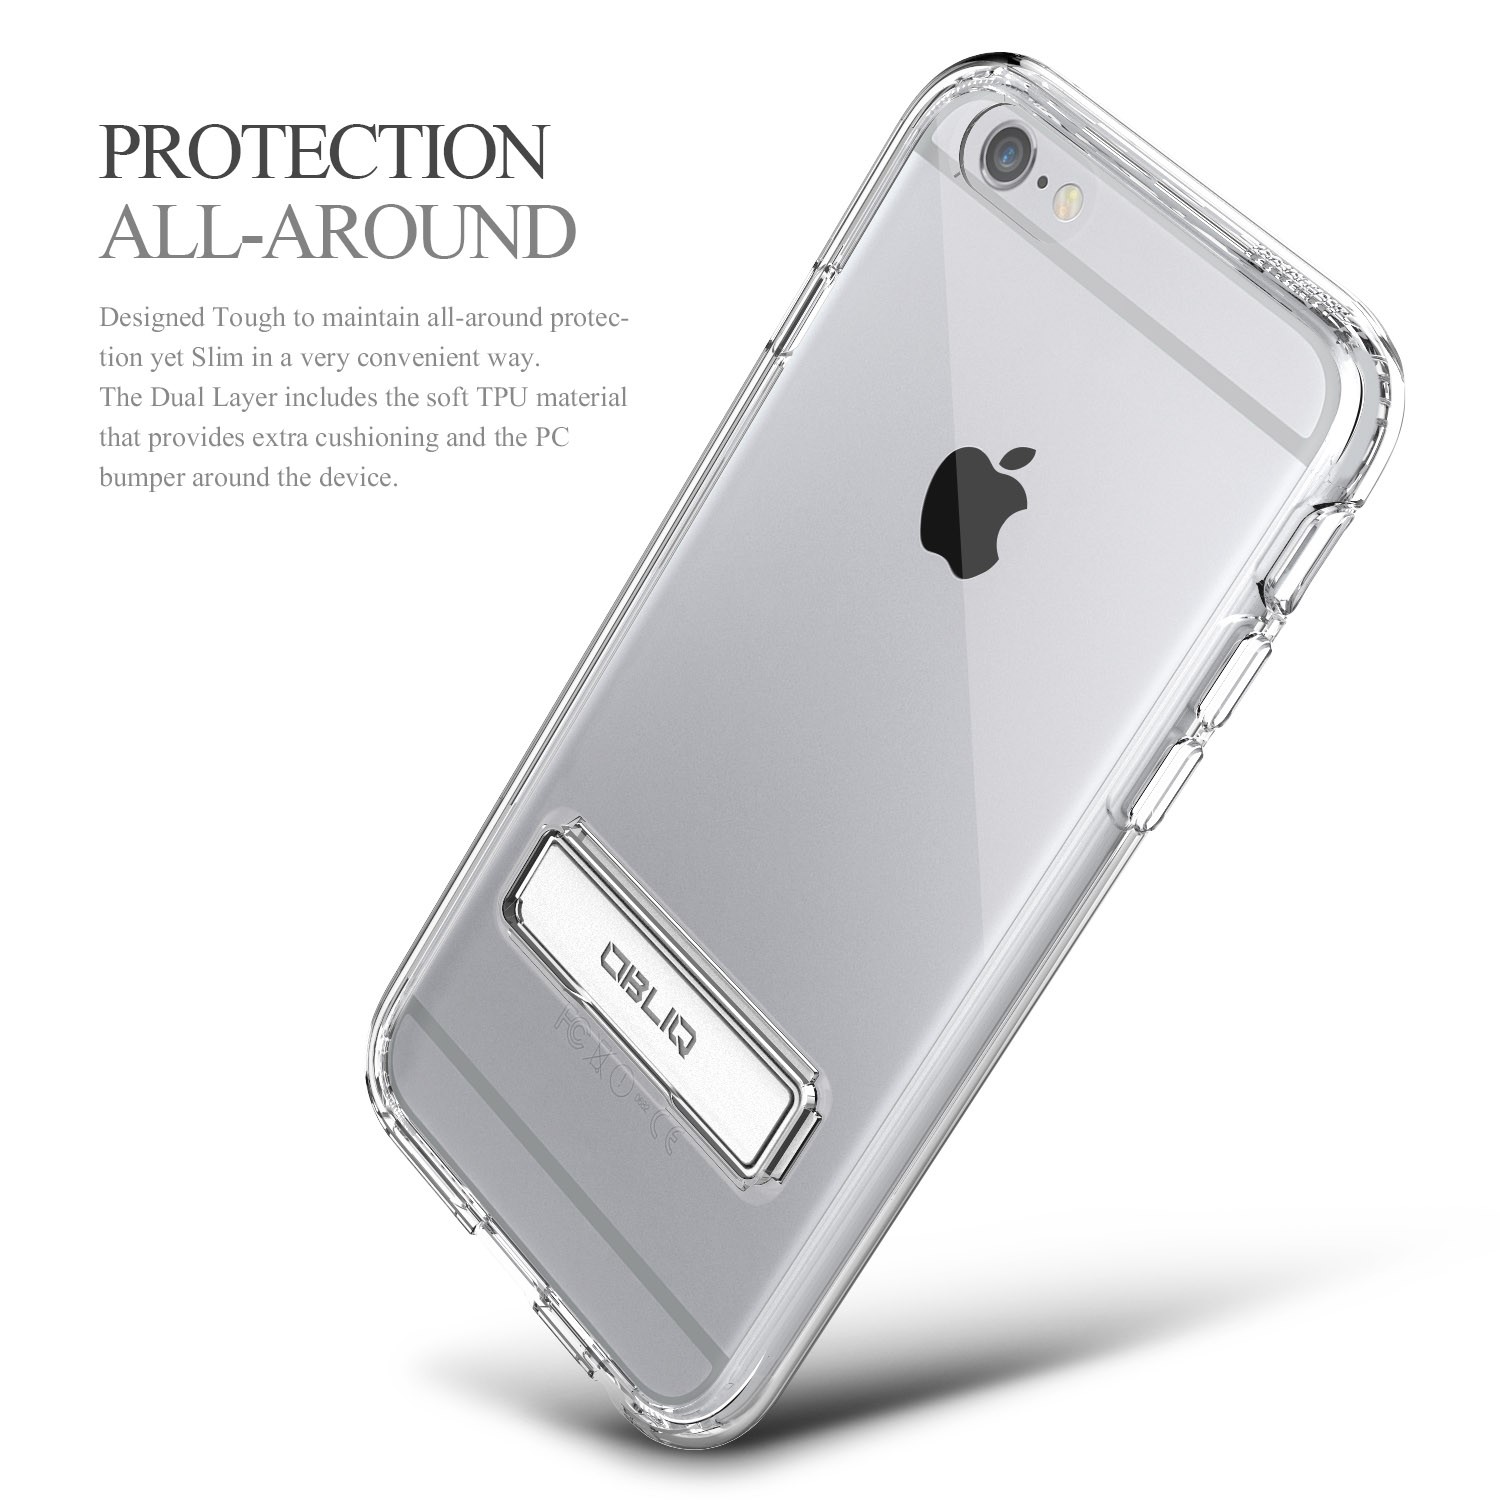 Obliq Naked Shield iPhone 6/6S Case - Clear